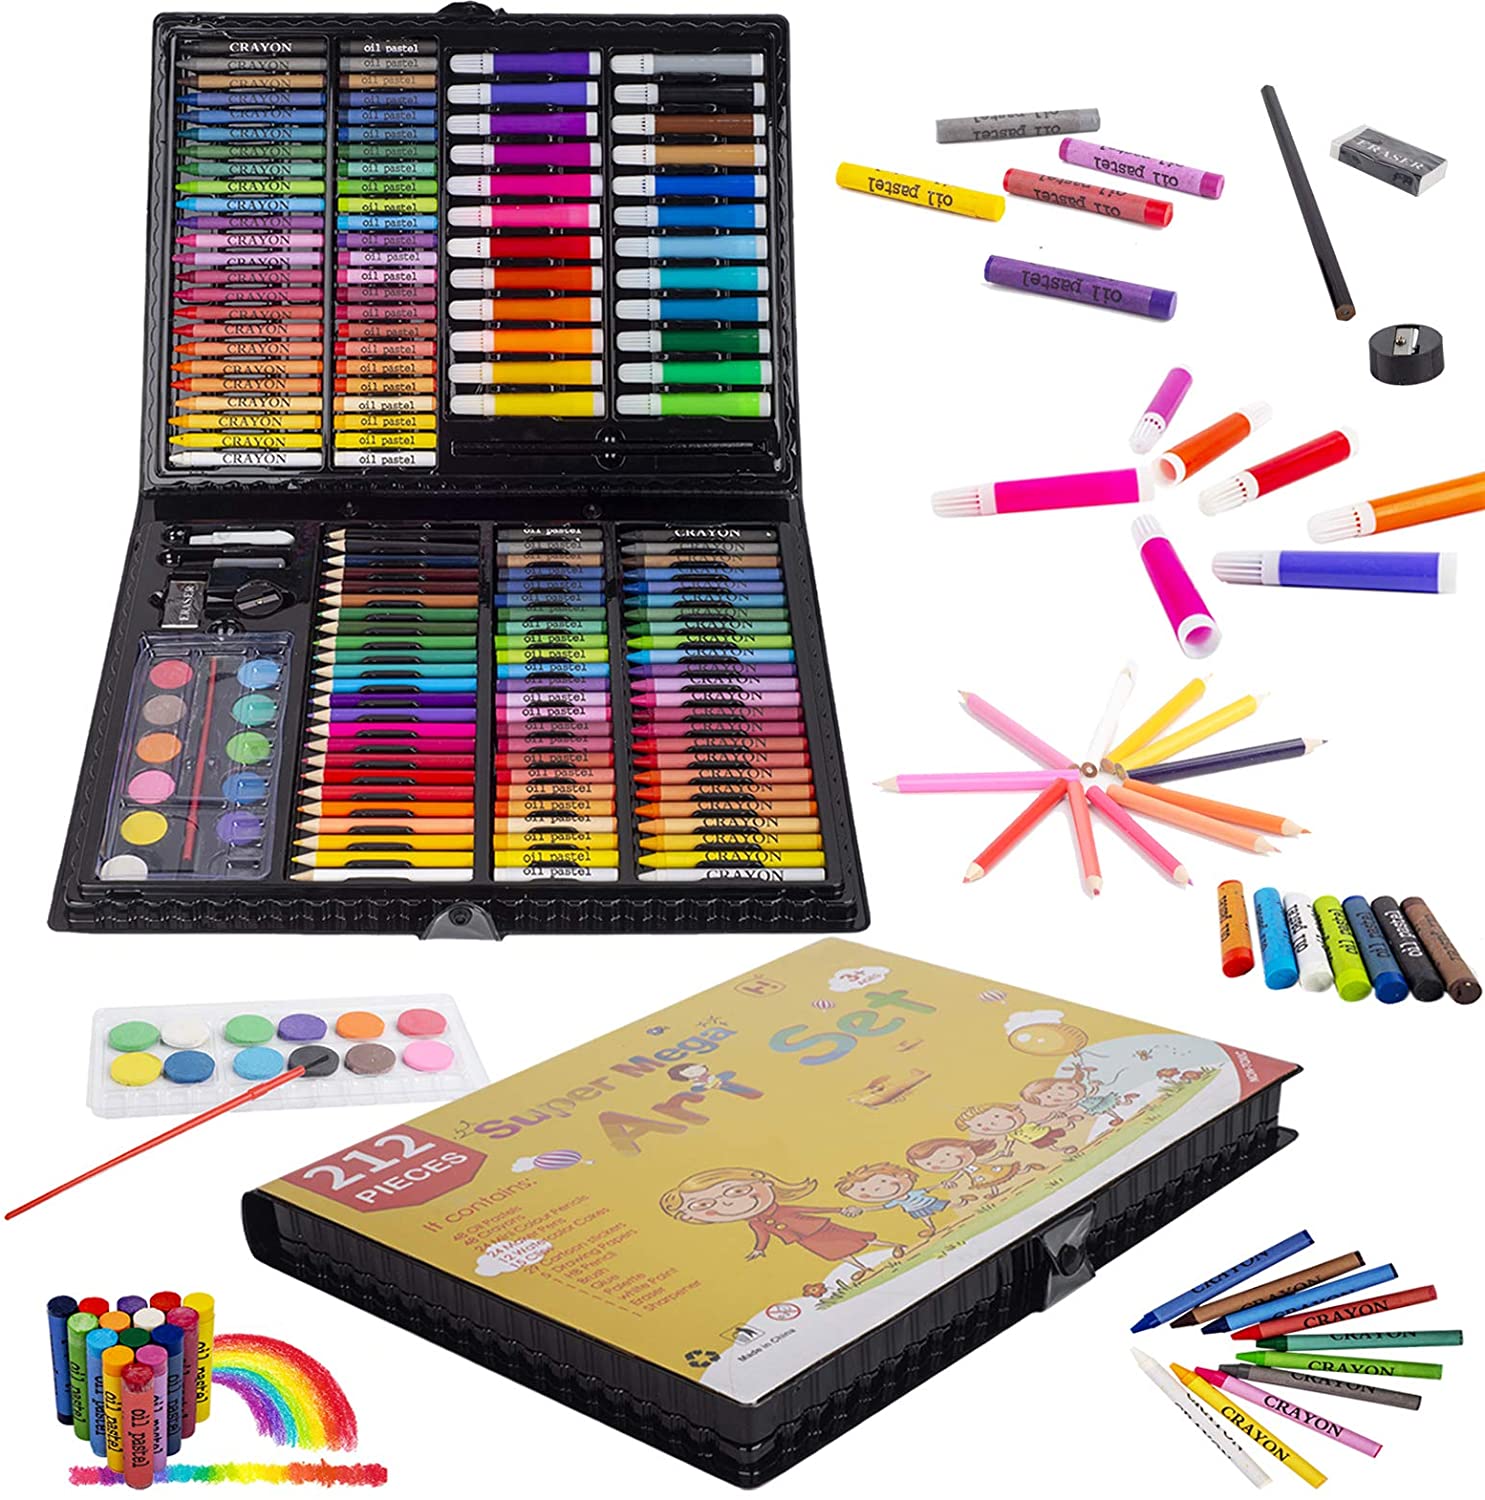 KINSPORY 212 PCS Portable Inspiration & Creativity Coloring Art Set Painting & Drawing Supplies Kit, Markers, Oil Pastels, Crayons, Colour Pencils, Watercolour Cakes, Palette, Brush, Drawing Papers